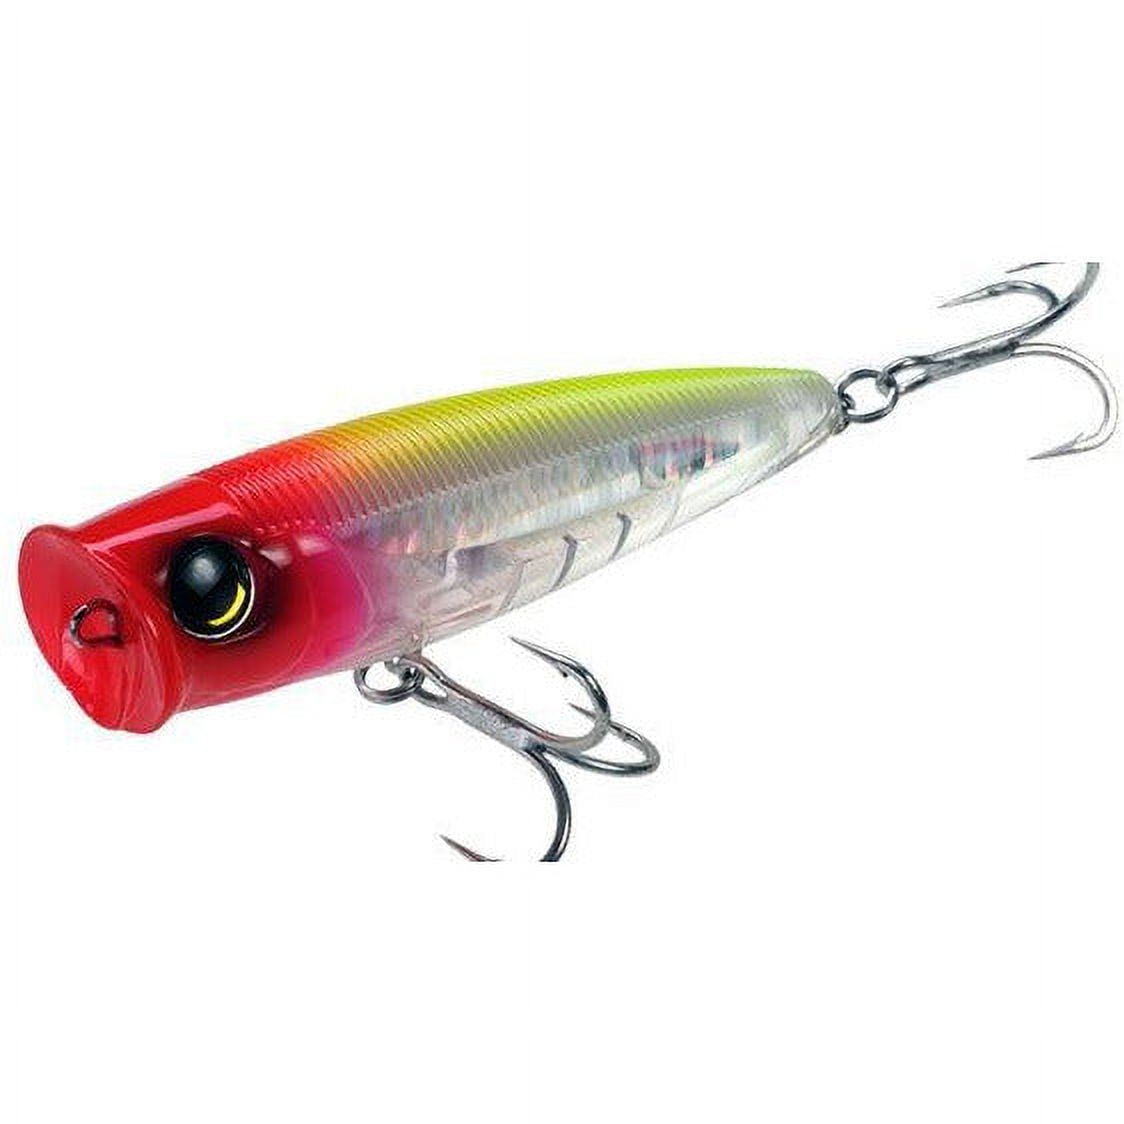 3 Pieces/Lot 19cm/120g Big Popper Lure Kit 3D Eyes Lifelike Bass Lure  Topwater Big Game Artificial Bait Popper Lure for Bass Tuna GT Trout  Saltwater Fishing Baits (A 3PCS), Topwater Lures 